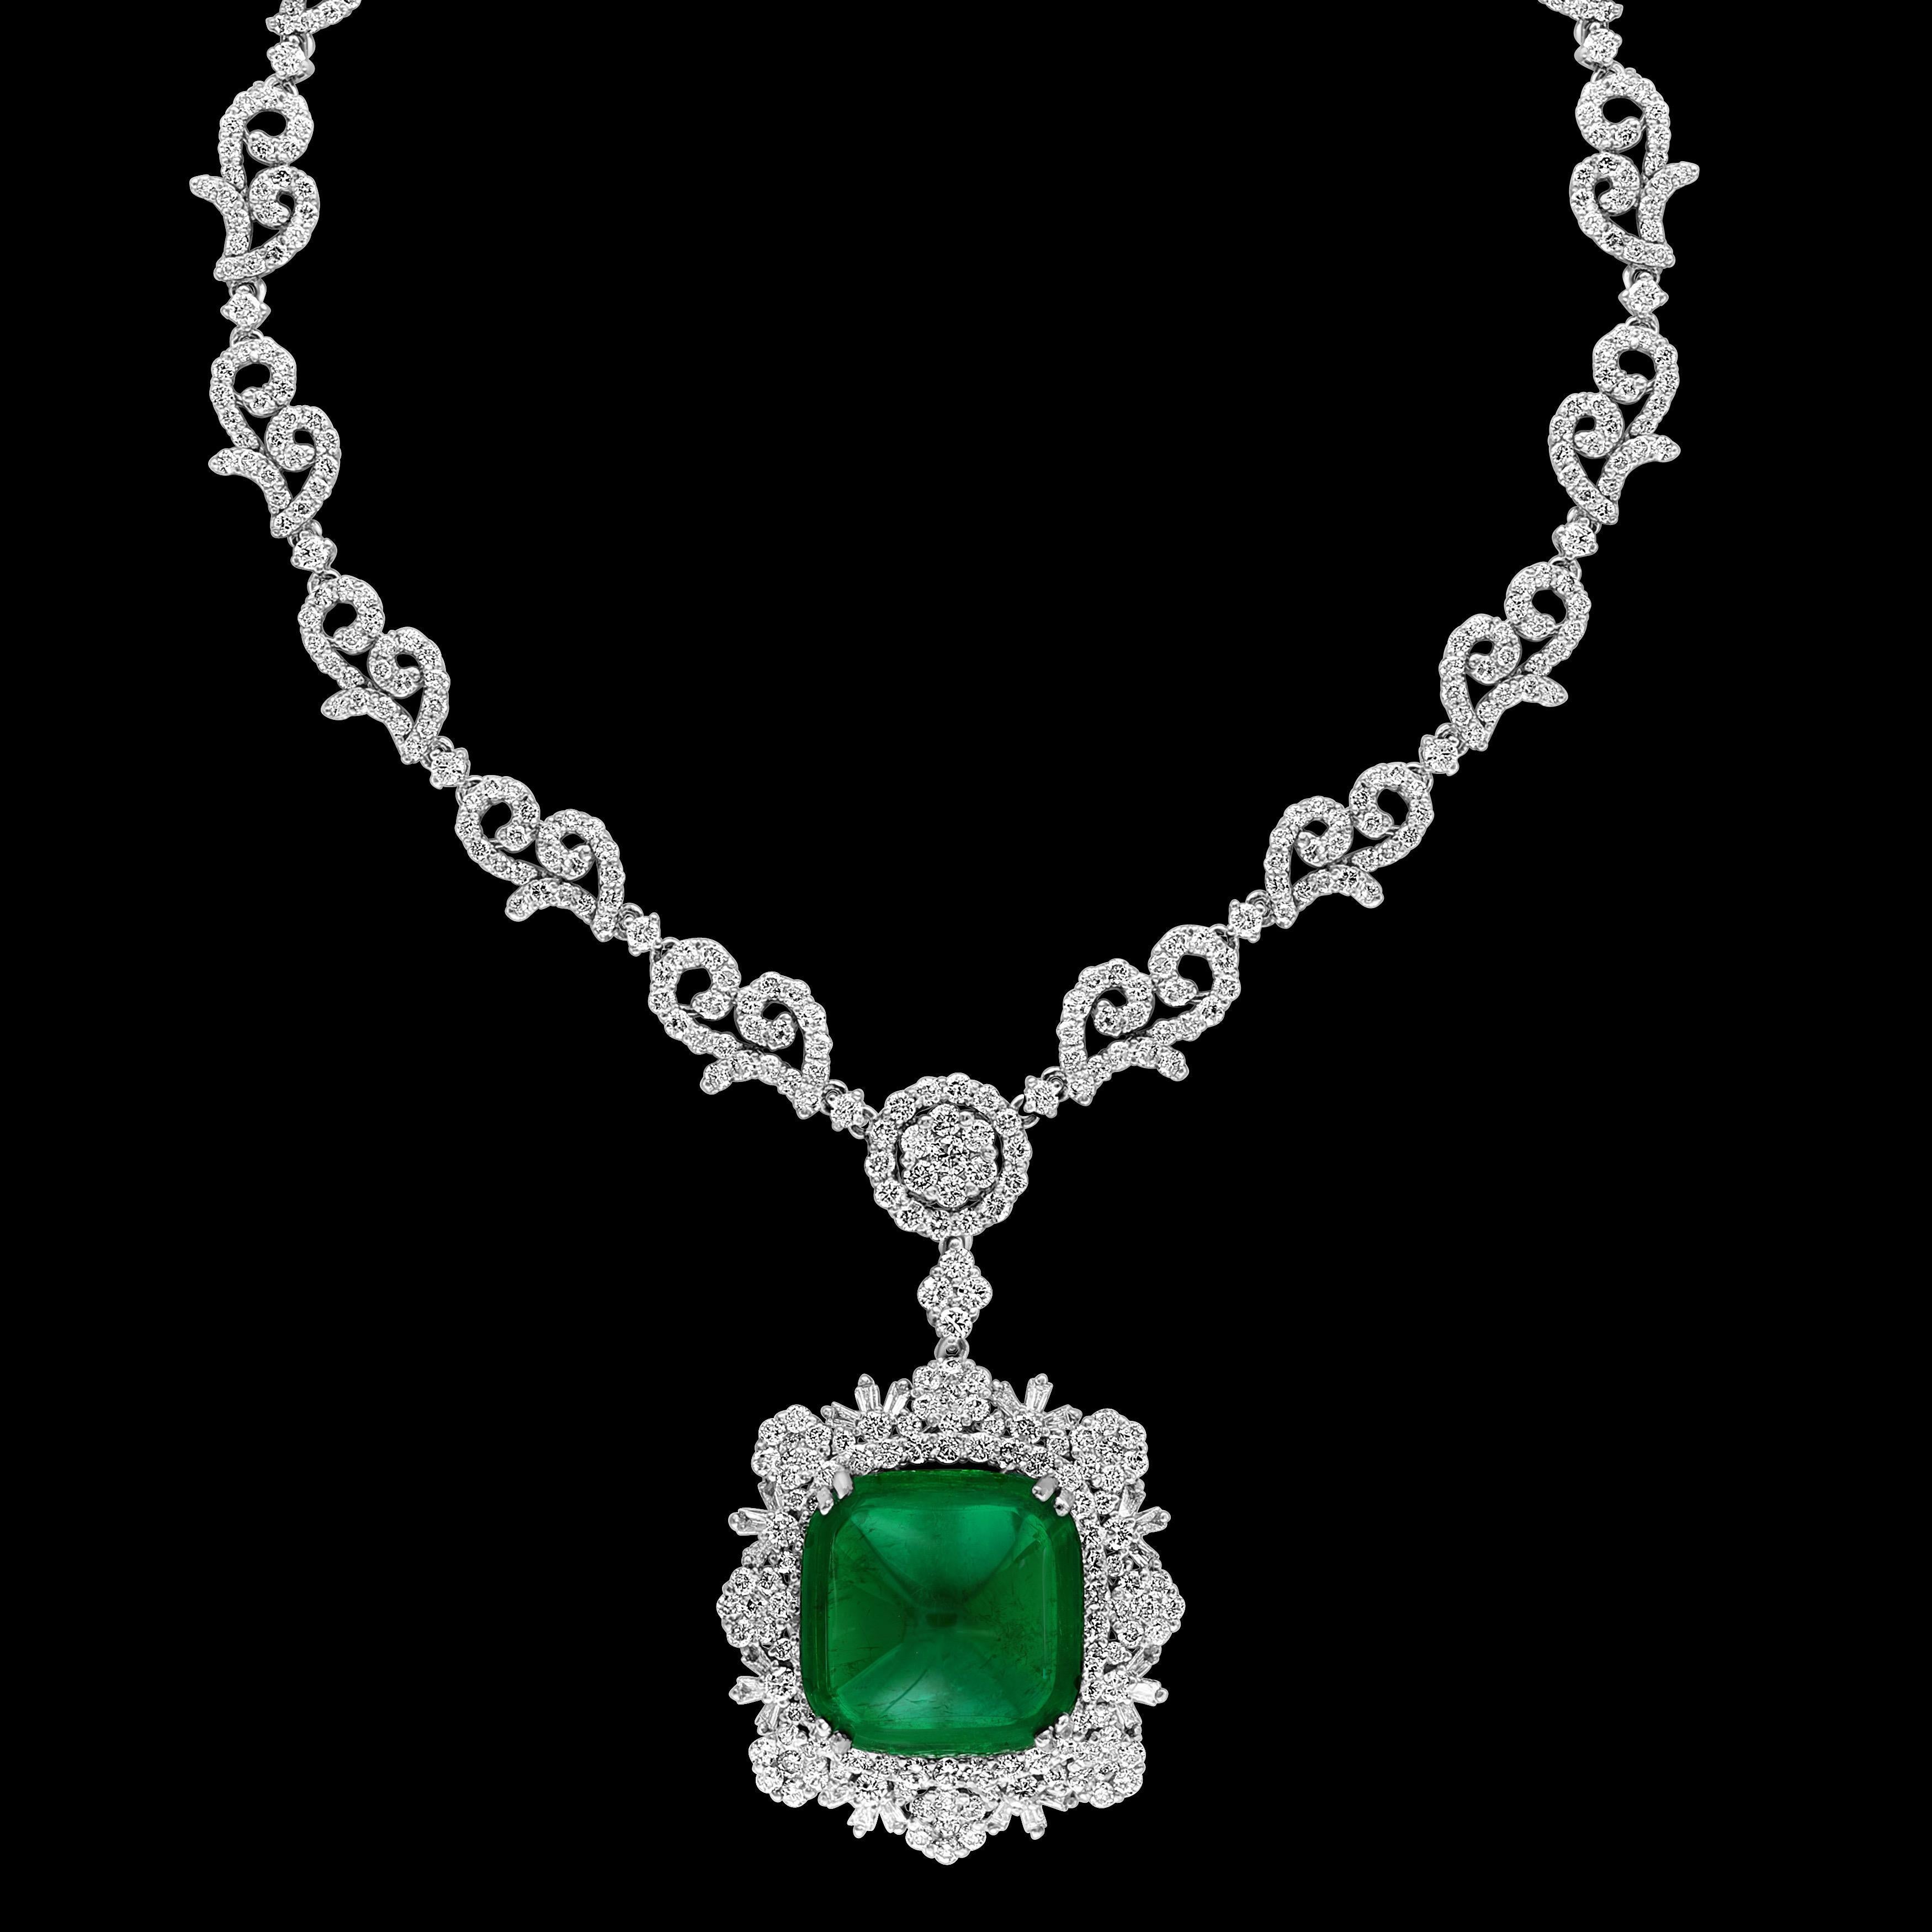 GIA certified 
GIA Report # 2221625145
 Origin : Colombia 
Clarity F2
17 Carat Sugar Loaf Cabochon Colombian Emerald & 12 Carat Diamond Necklace 18KWG
approximately  13 Carats of Diamond Necklace, Estate piece with Sugarloaf Colombian Emerald with